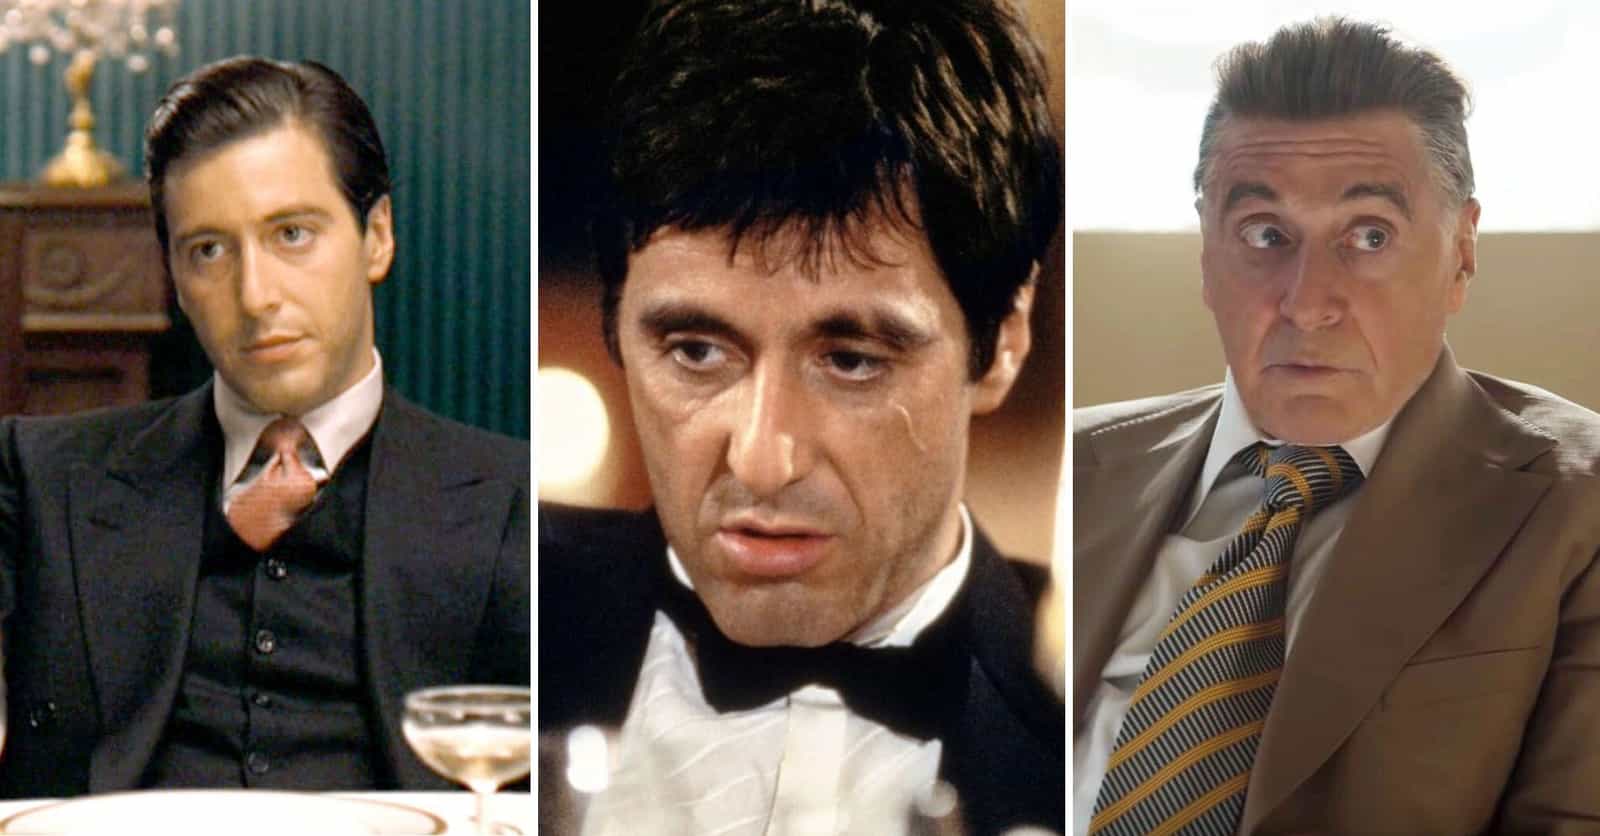 The 16 Al Pacino Crime And Gangster Movies That Prove He’s The Quintessential Mafioso